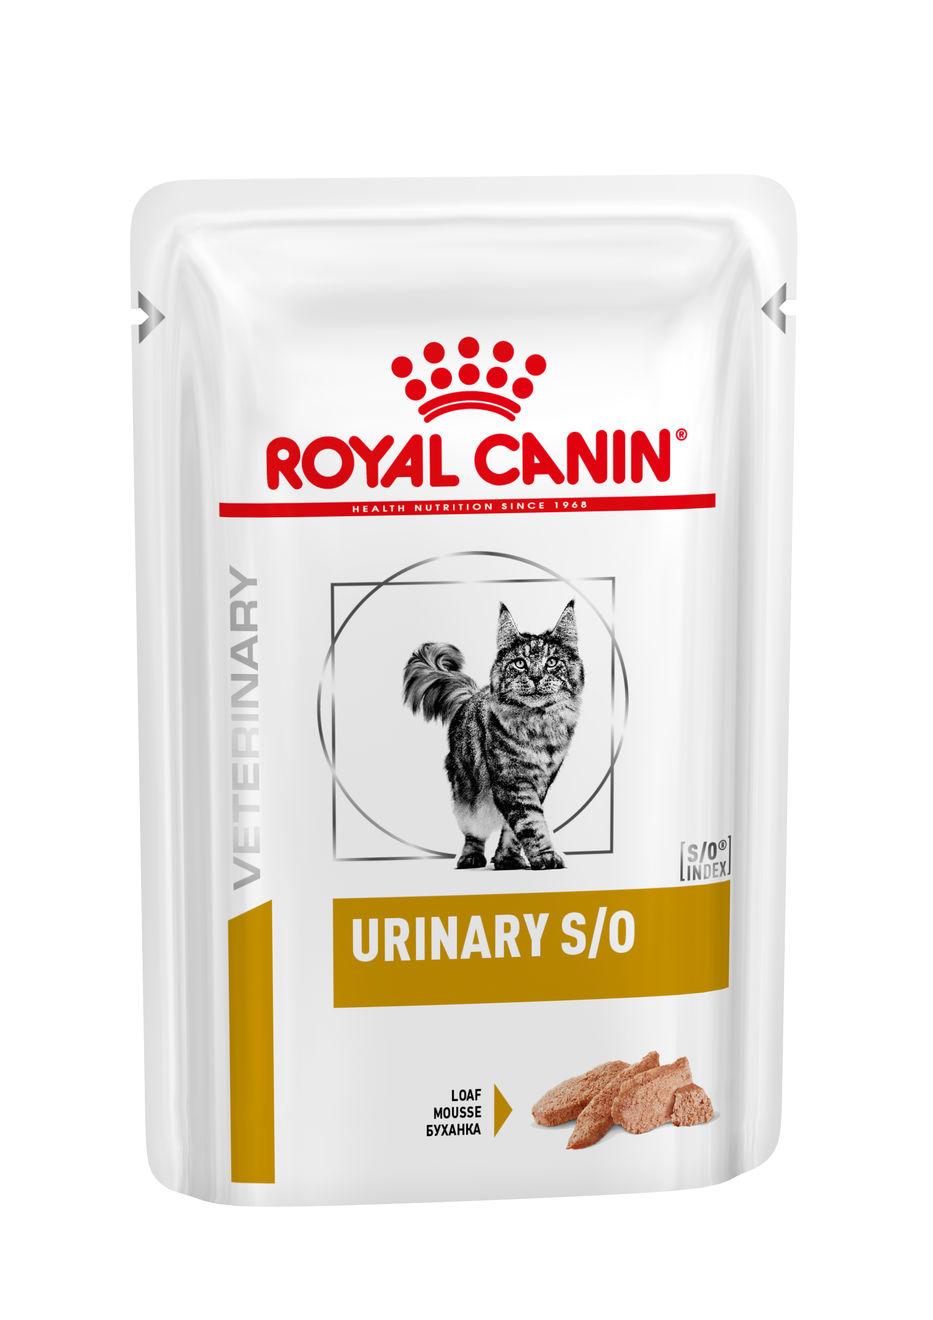 OUTLET - Royal Canin Urinary S/O Kat - pouches (loaf) 12x85g